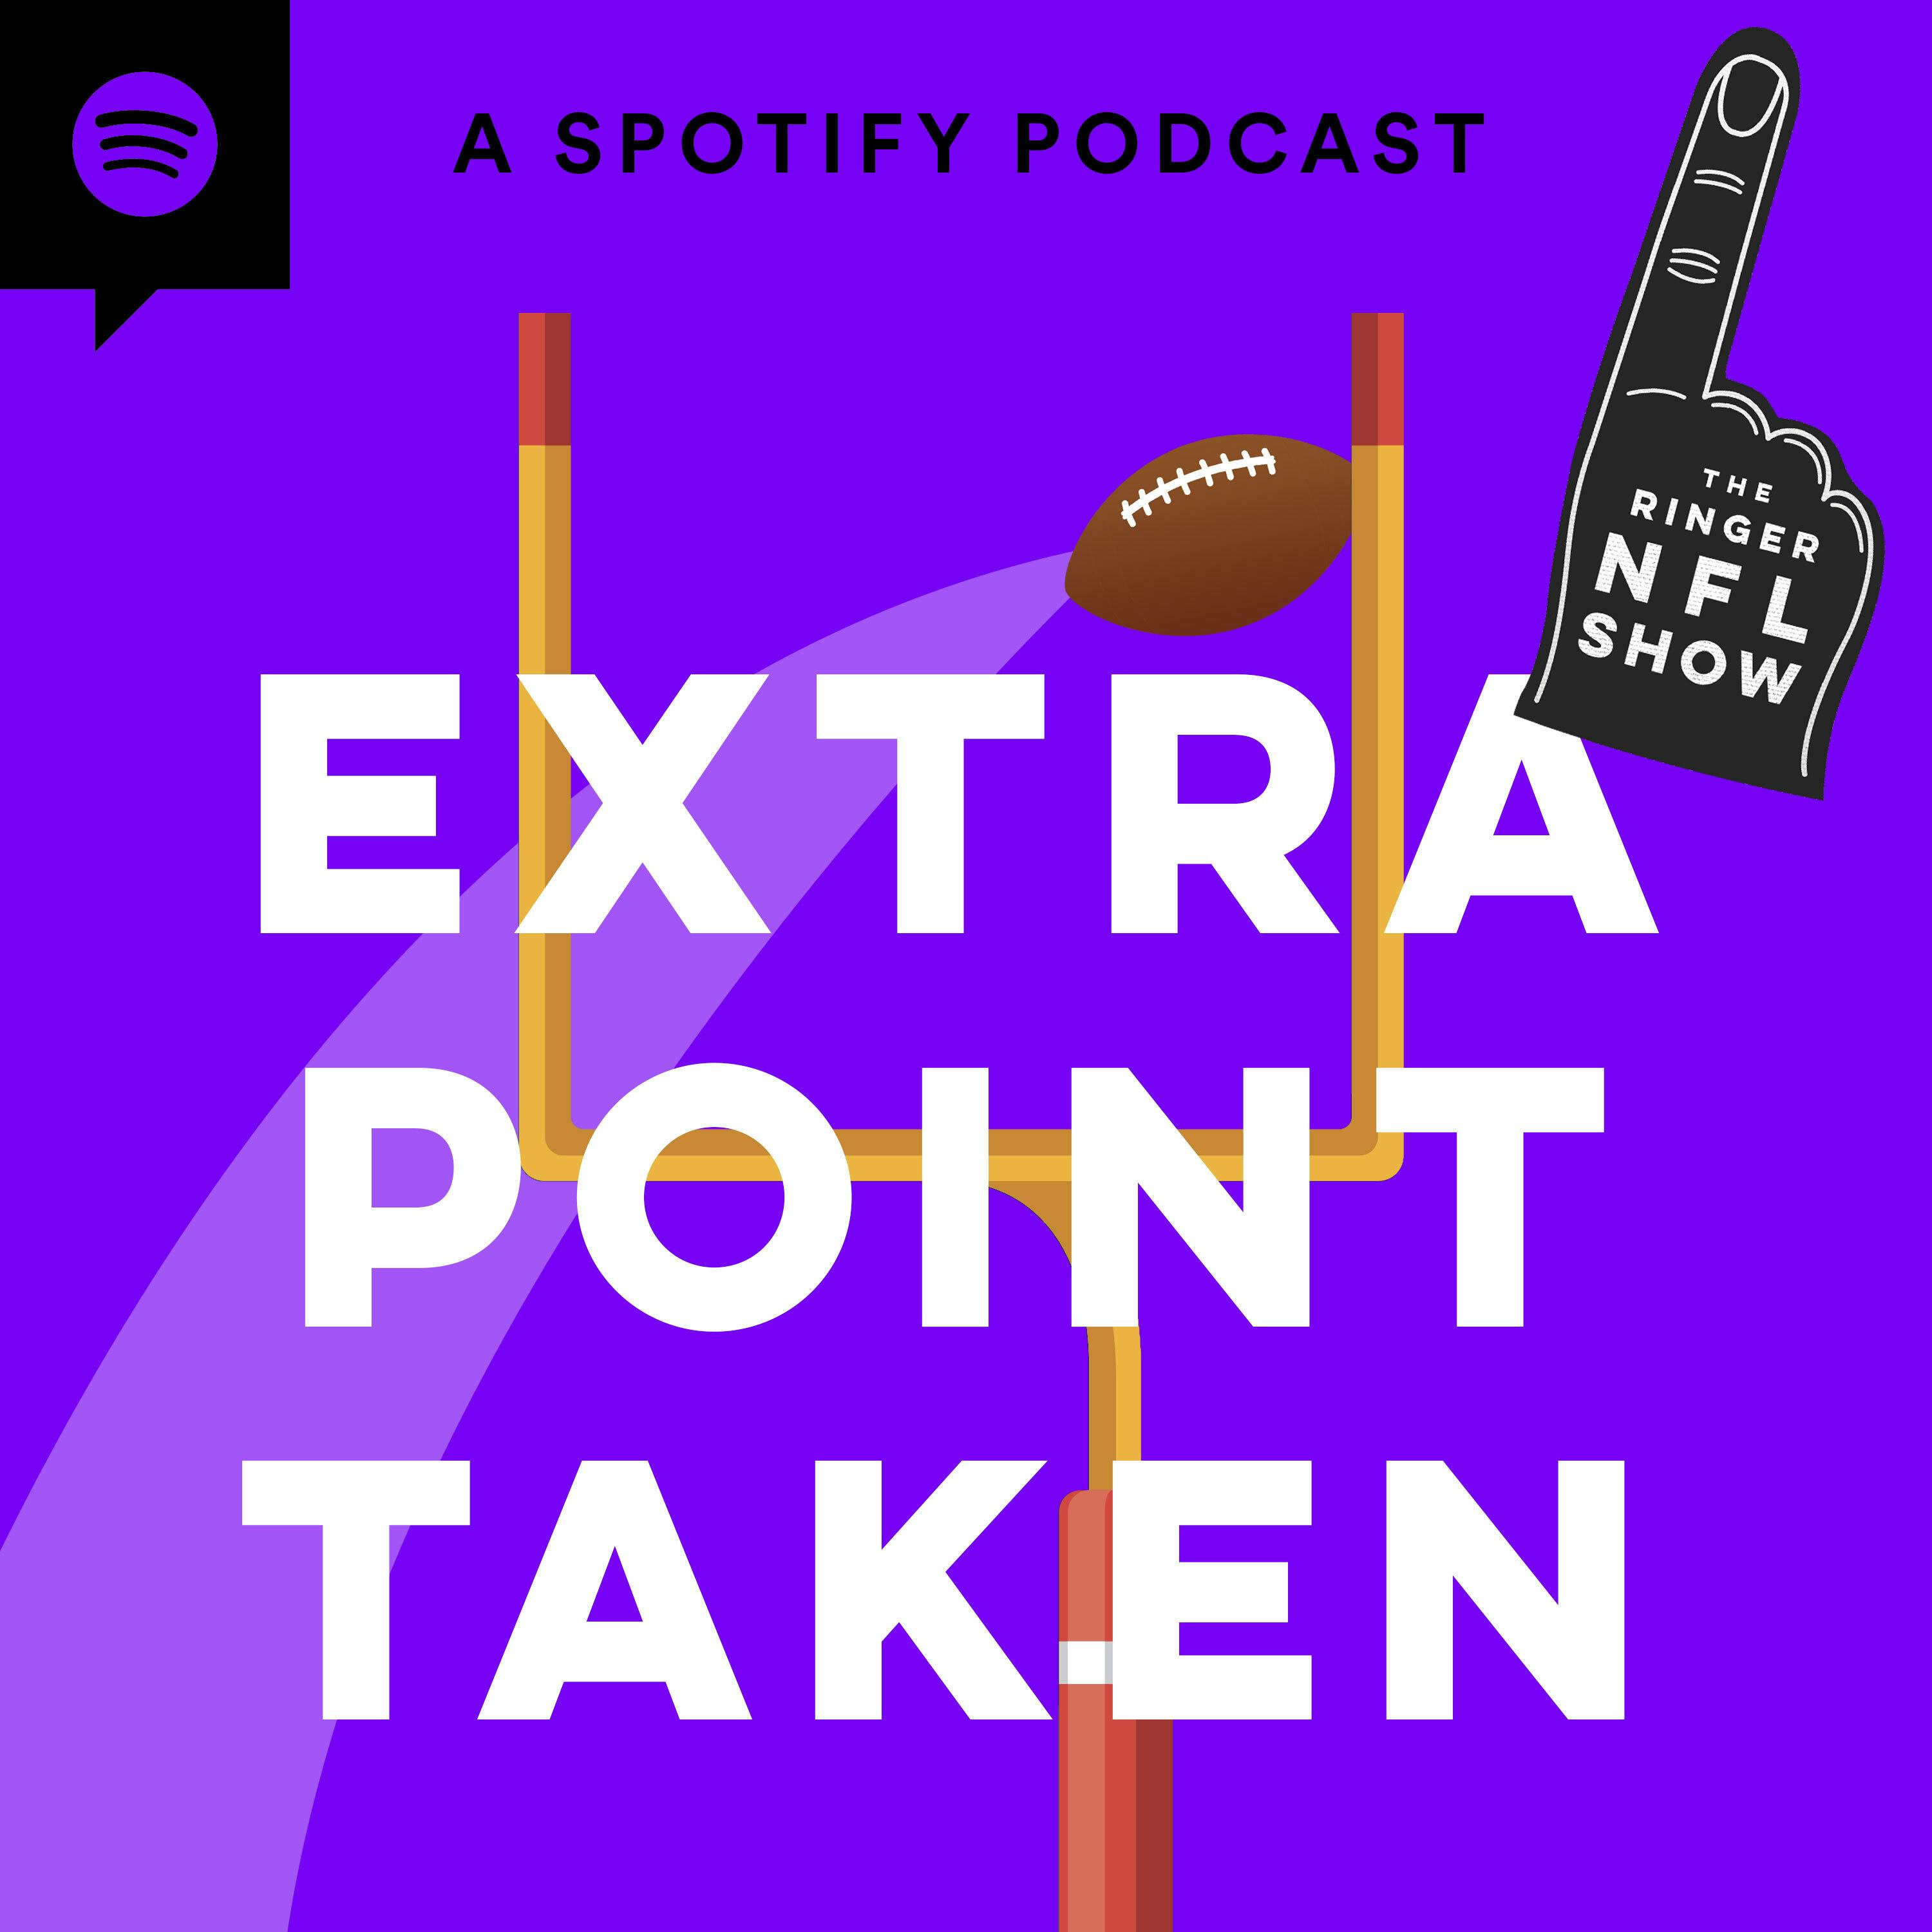 NFL Week 17 Picks, Props, and Predictions! | Extra Point Taken